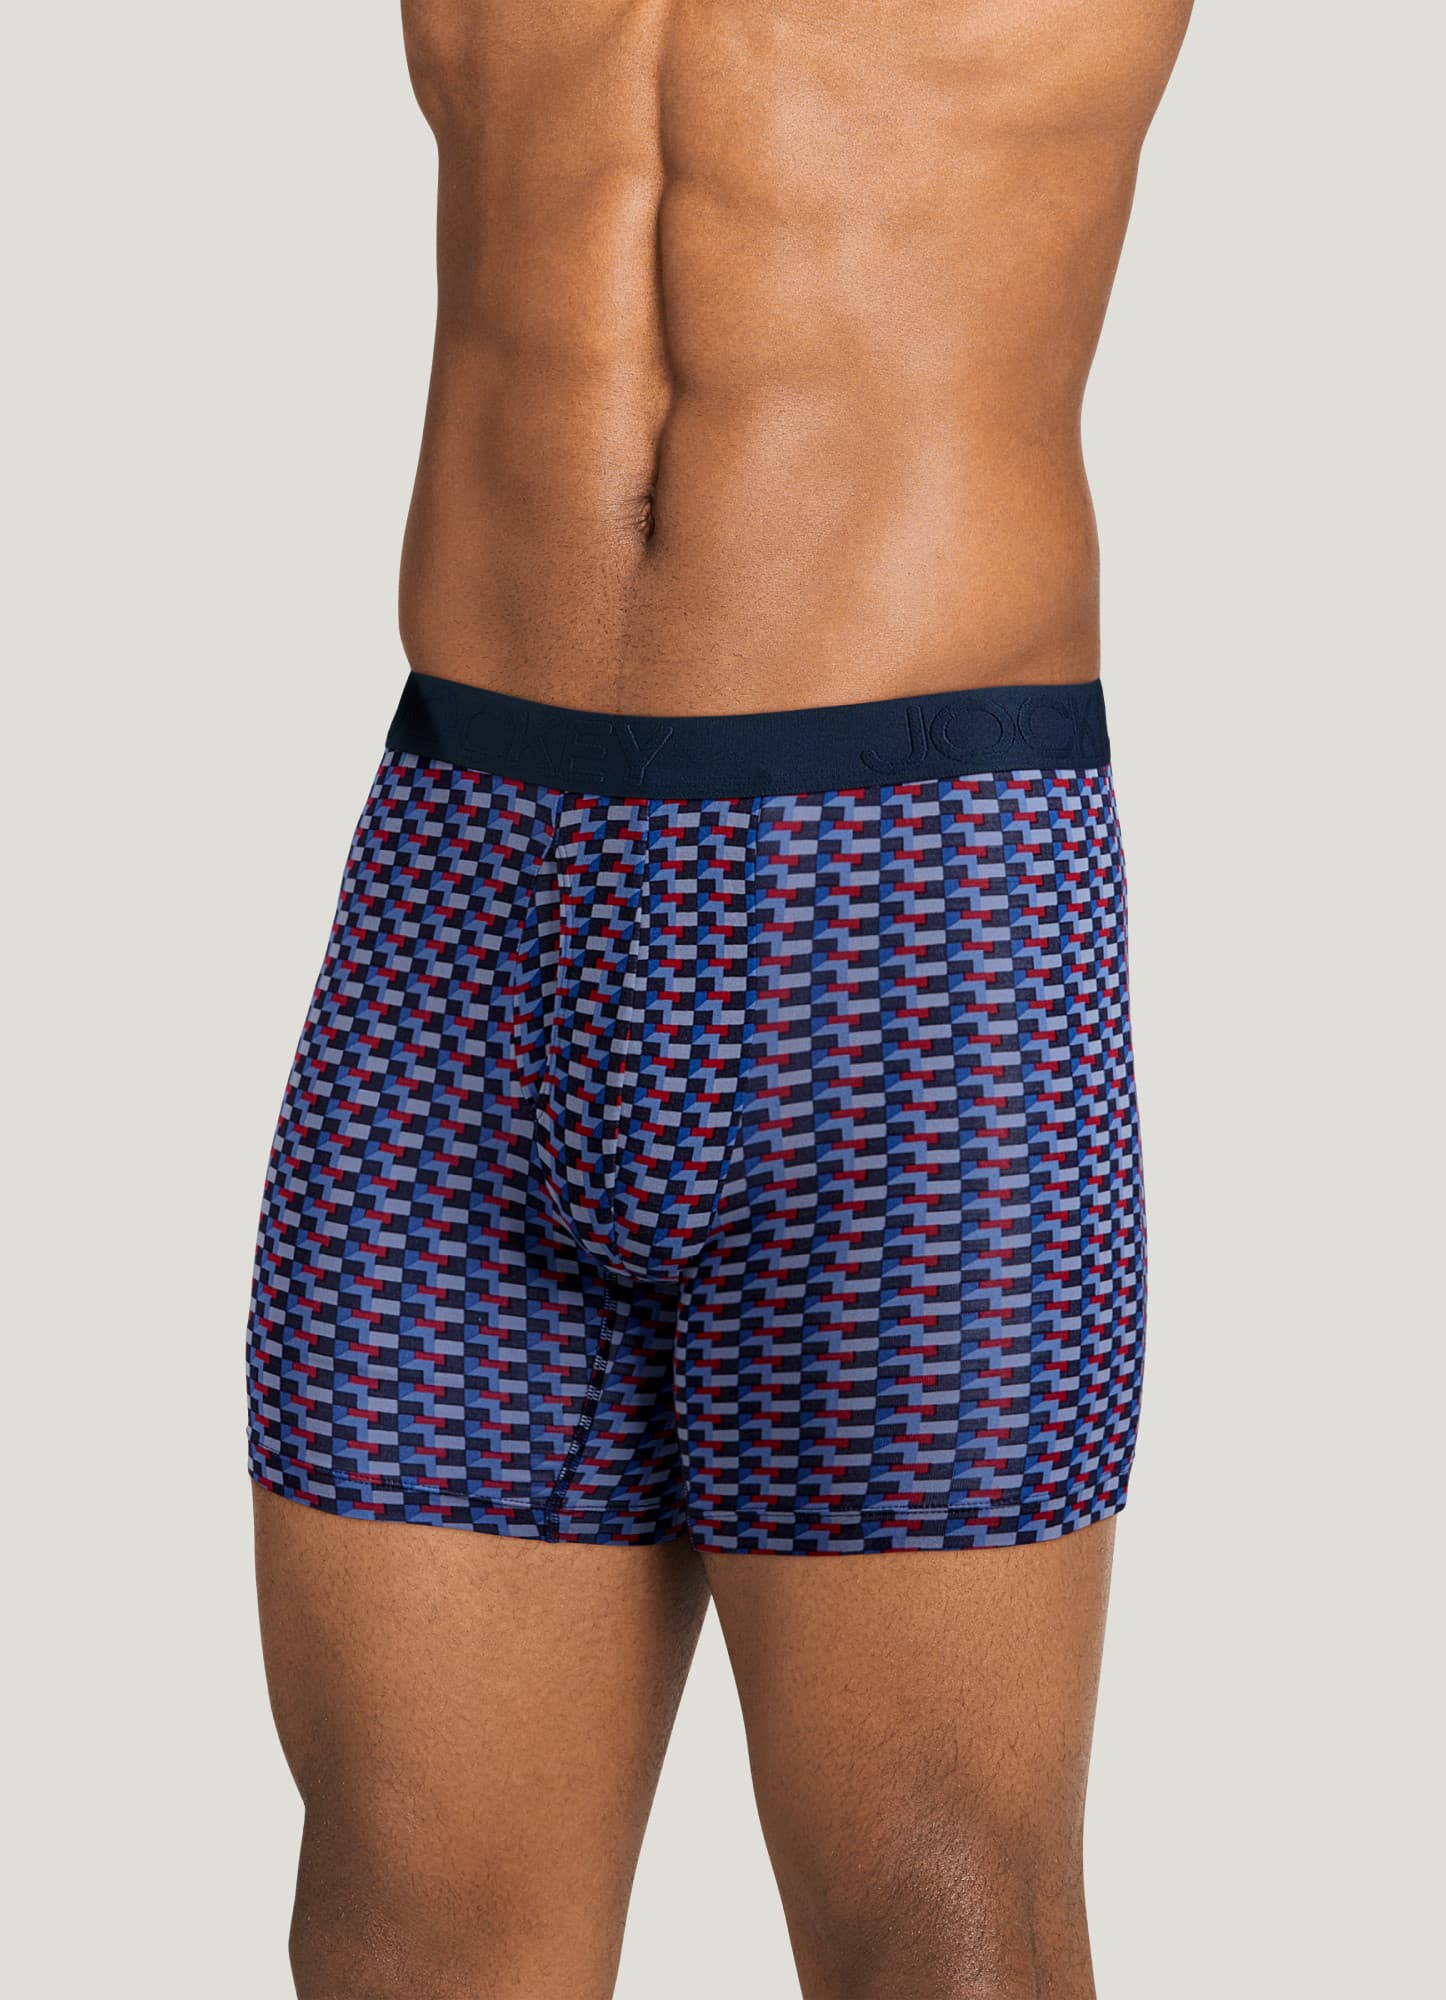 The magic blend of Cotton and Modal in SuperSoft Underwear makes